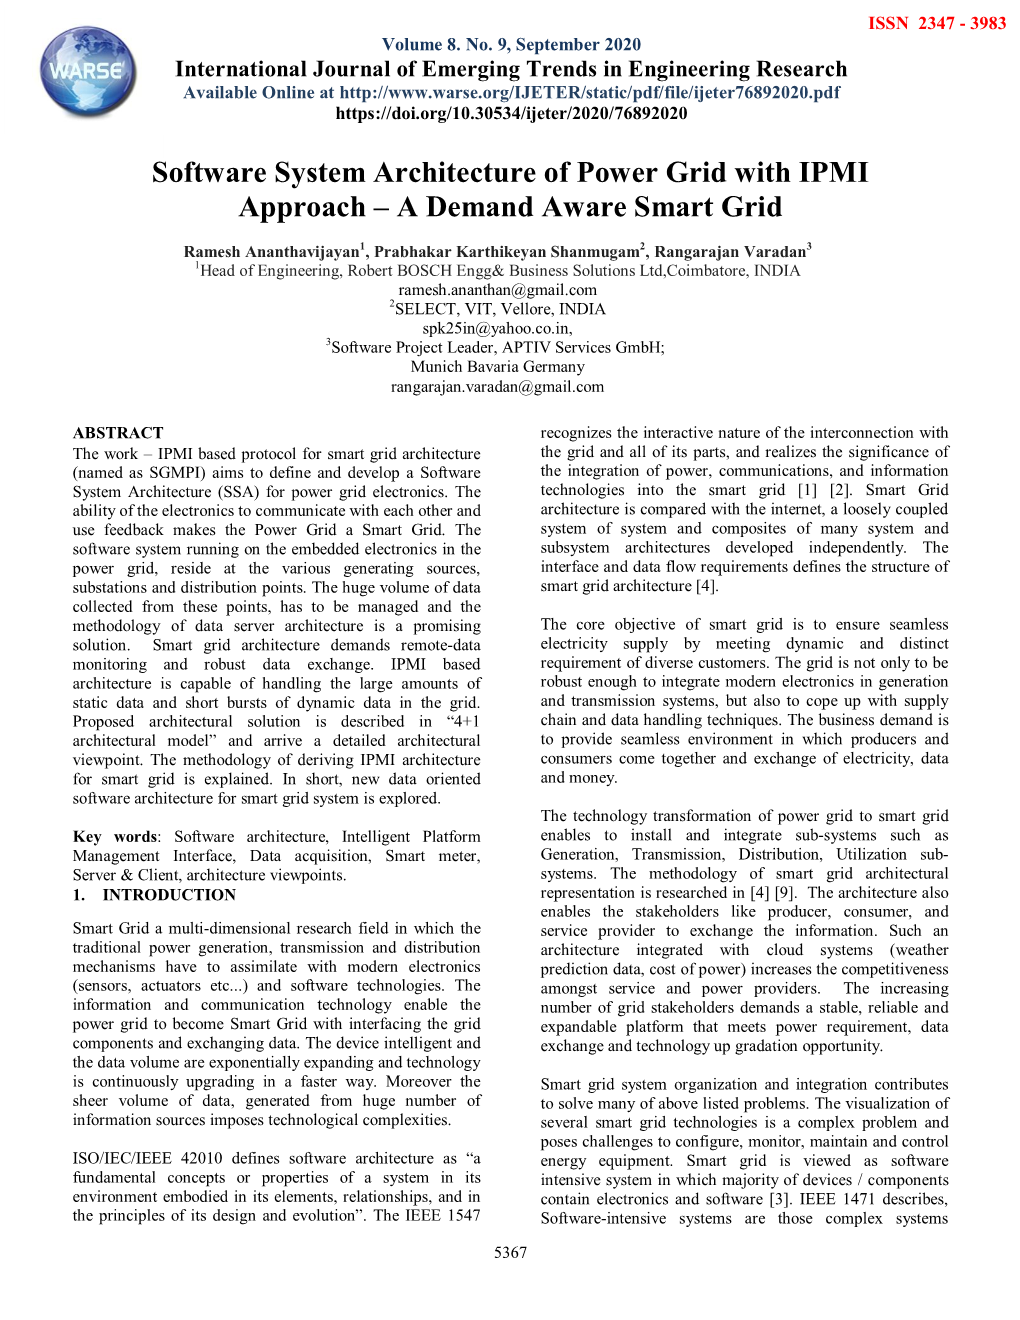 Software System Architecture of Power Grid with IPMI Approach – A